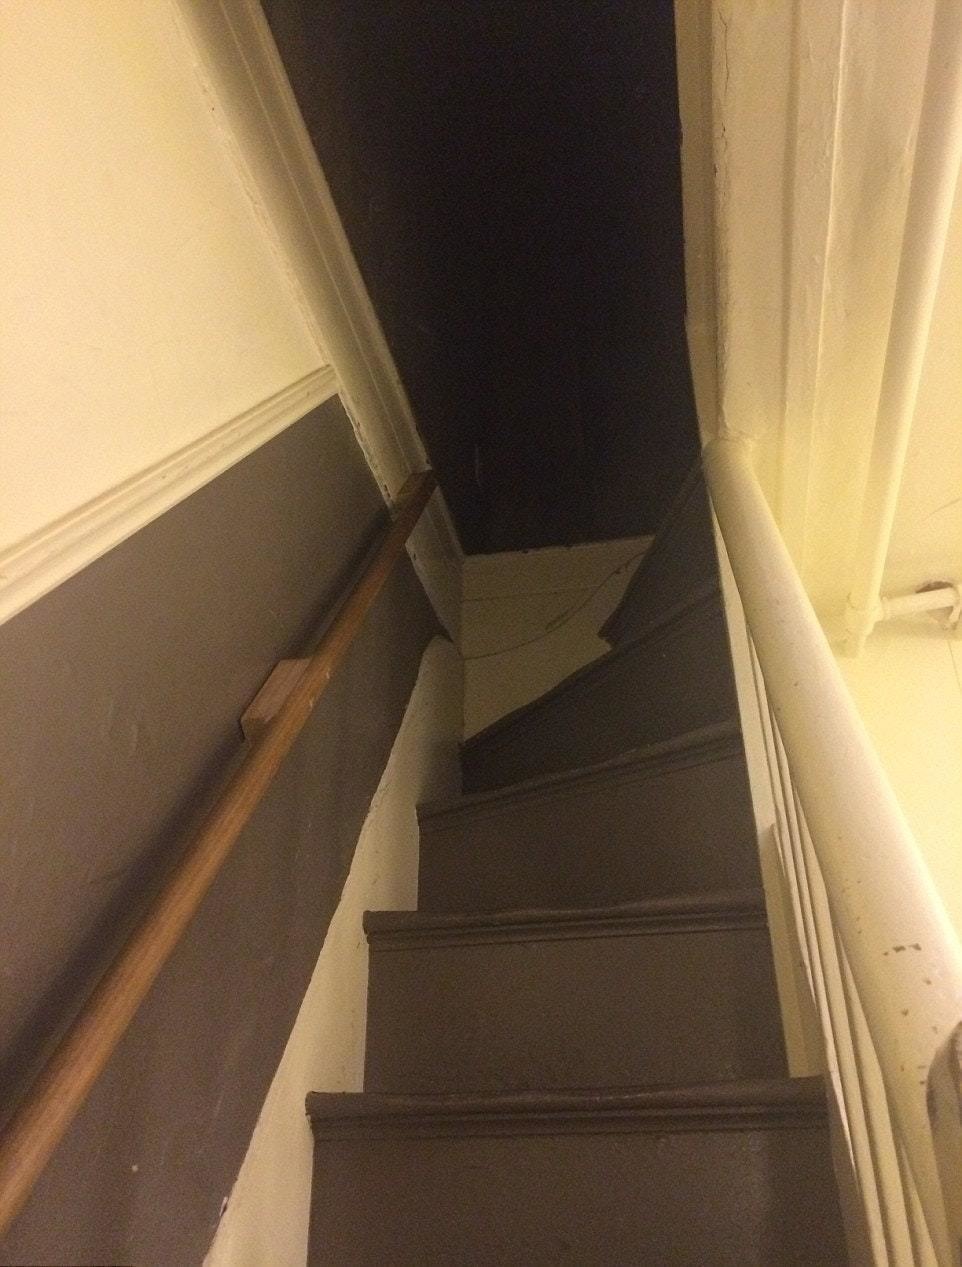 They Went Upstairs